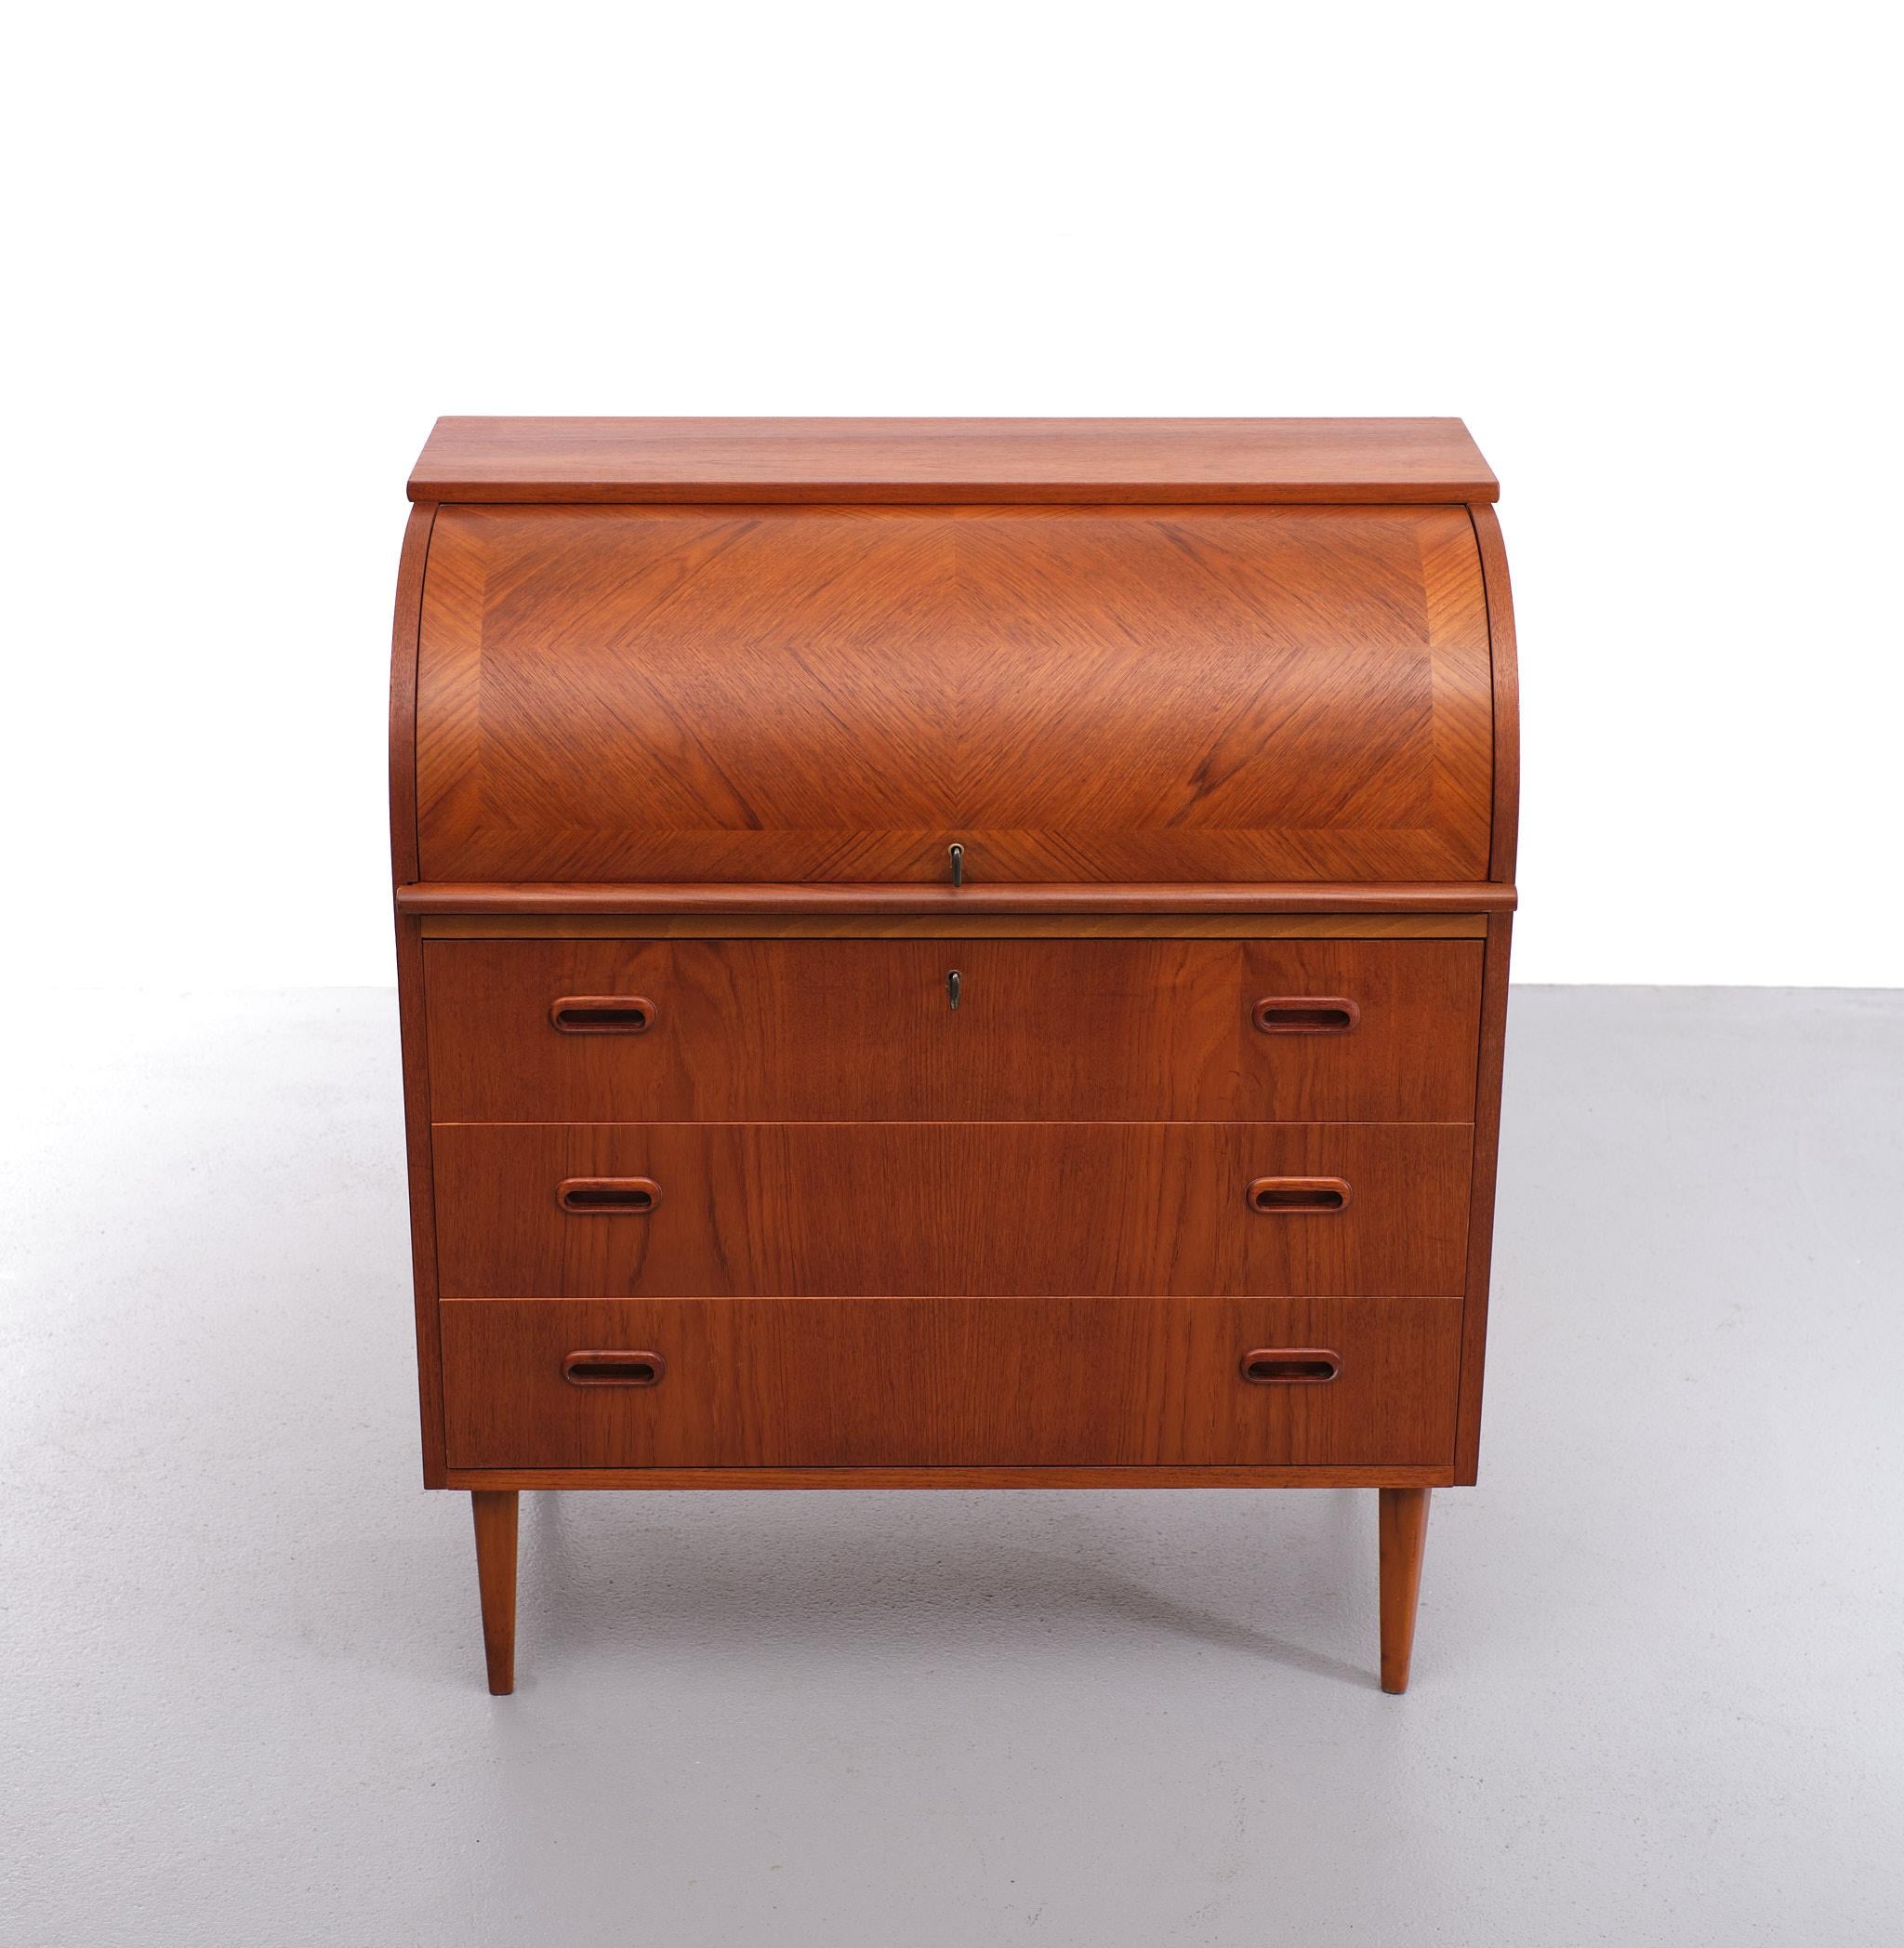 Highly decorative yet functional Scandinavian Mid Century Modern chest of drawers with roll top. The roll top has a geometrical veneer pattern. Under the roll top is a sliding desk shelf, Two small drawers and Three boxes. This cabinet stands on